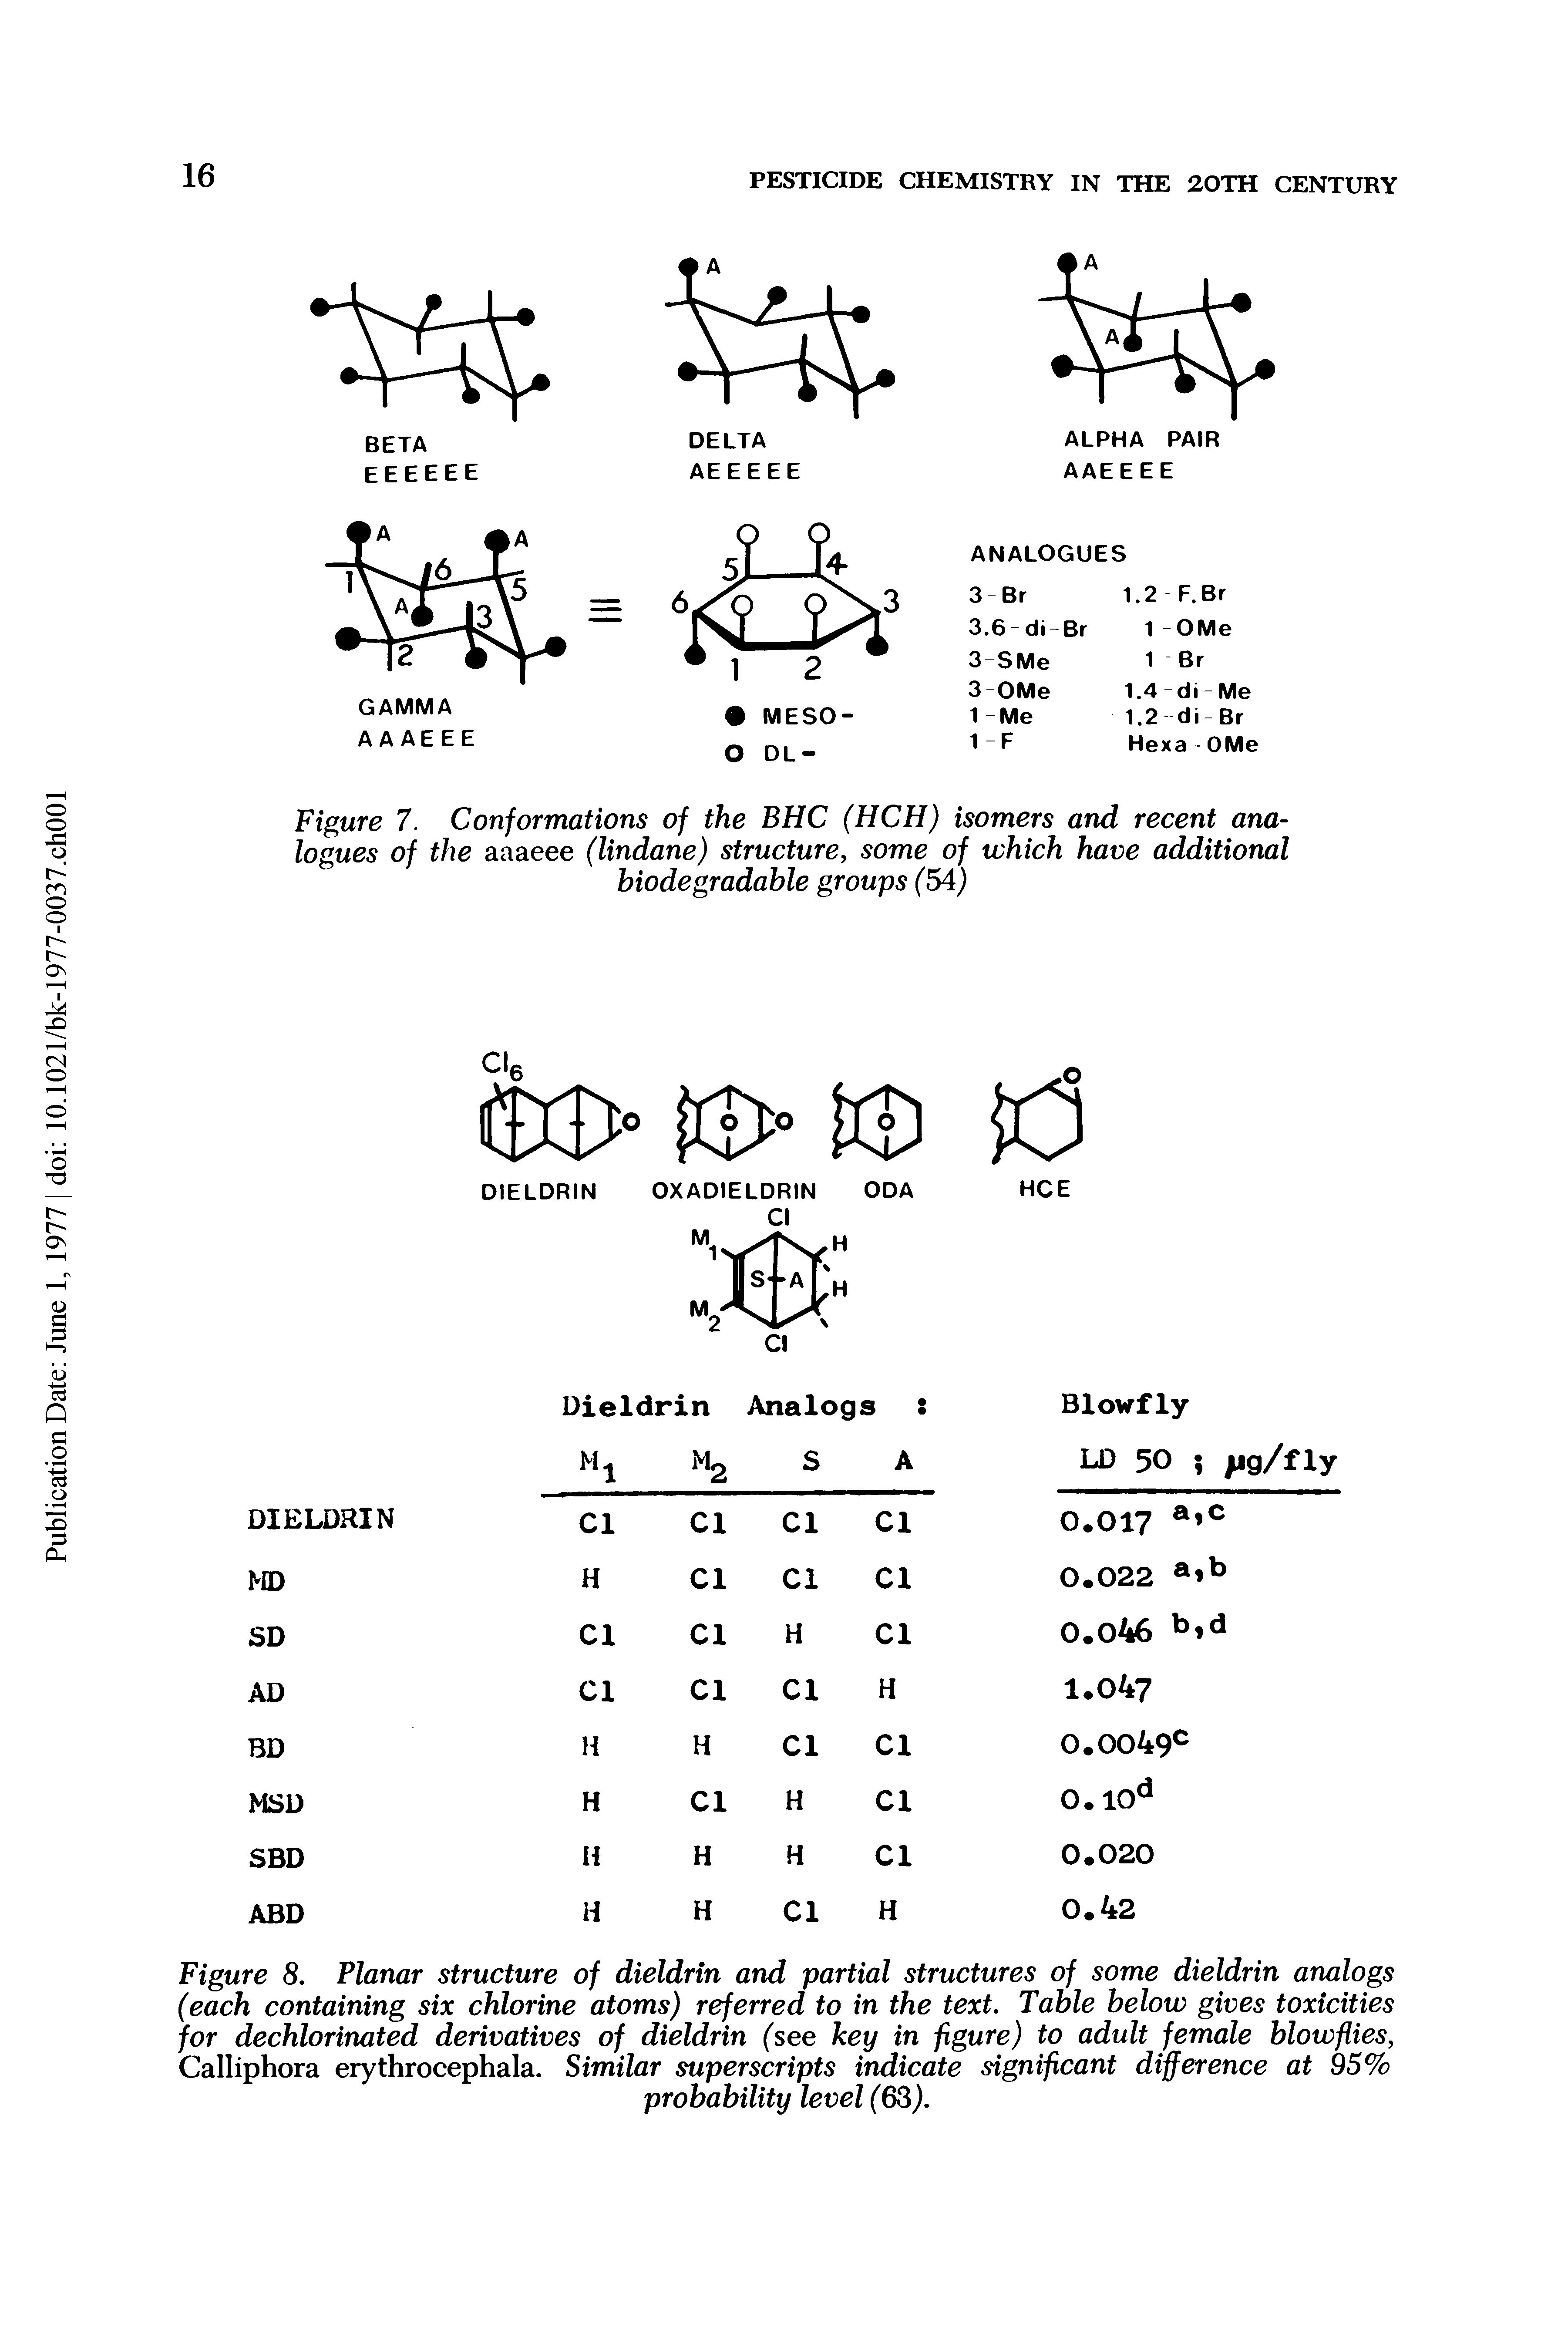 Figure 8. Planar structure of dieldrin and partial structures of some dieldrin analogs (each containing six chlorine atoms) referred to in the text. Table below gives toxicities for dechlorinated derivatives of dieldrin (see key in figure) to adult female blowflies, Calliphora erythrocephala. Similar superscripts indicate significant difference at 95%...